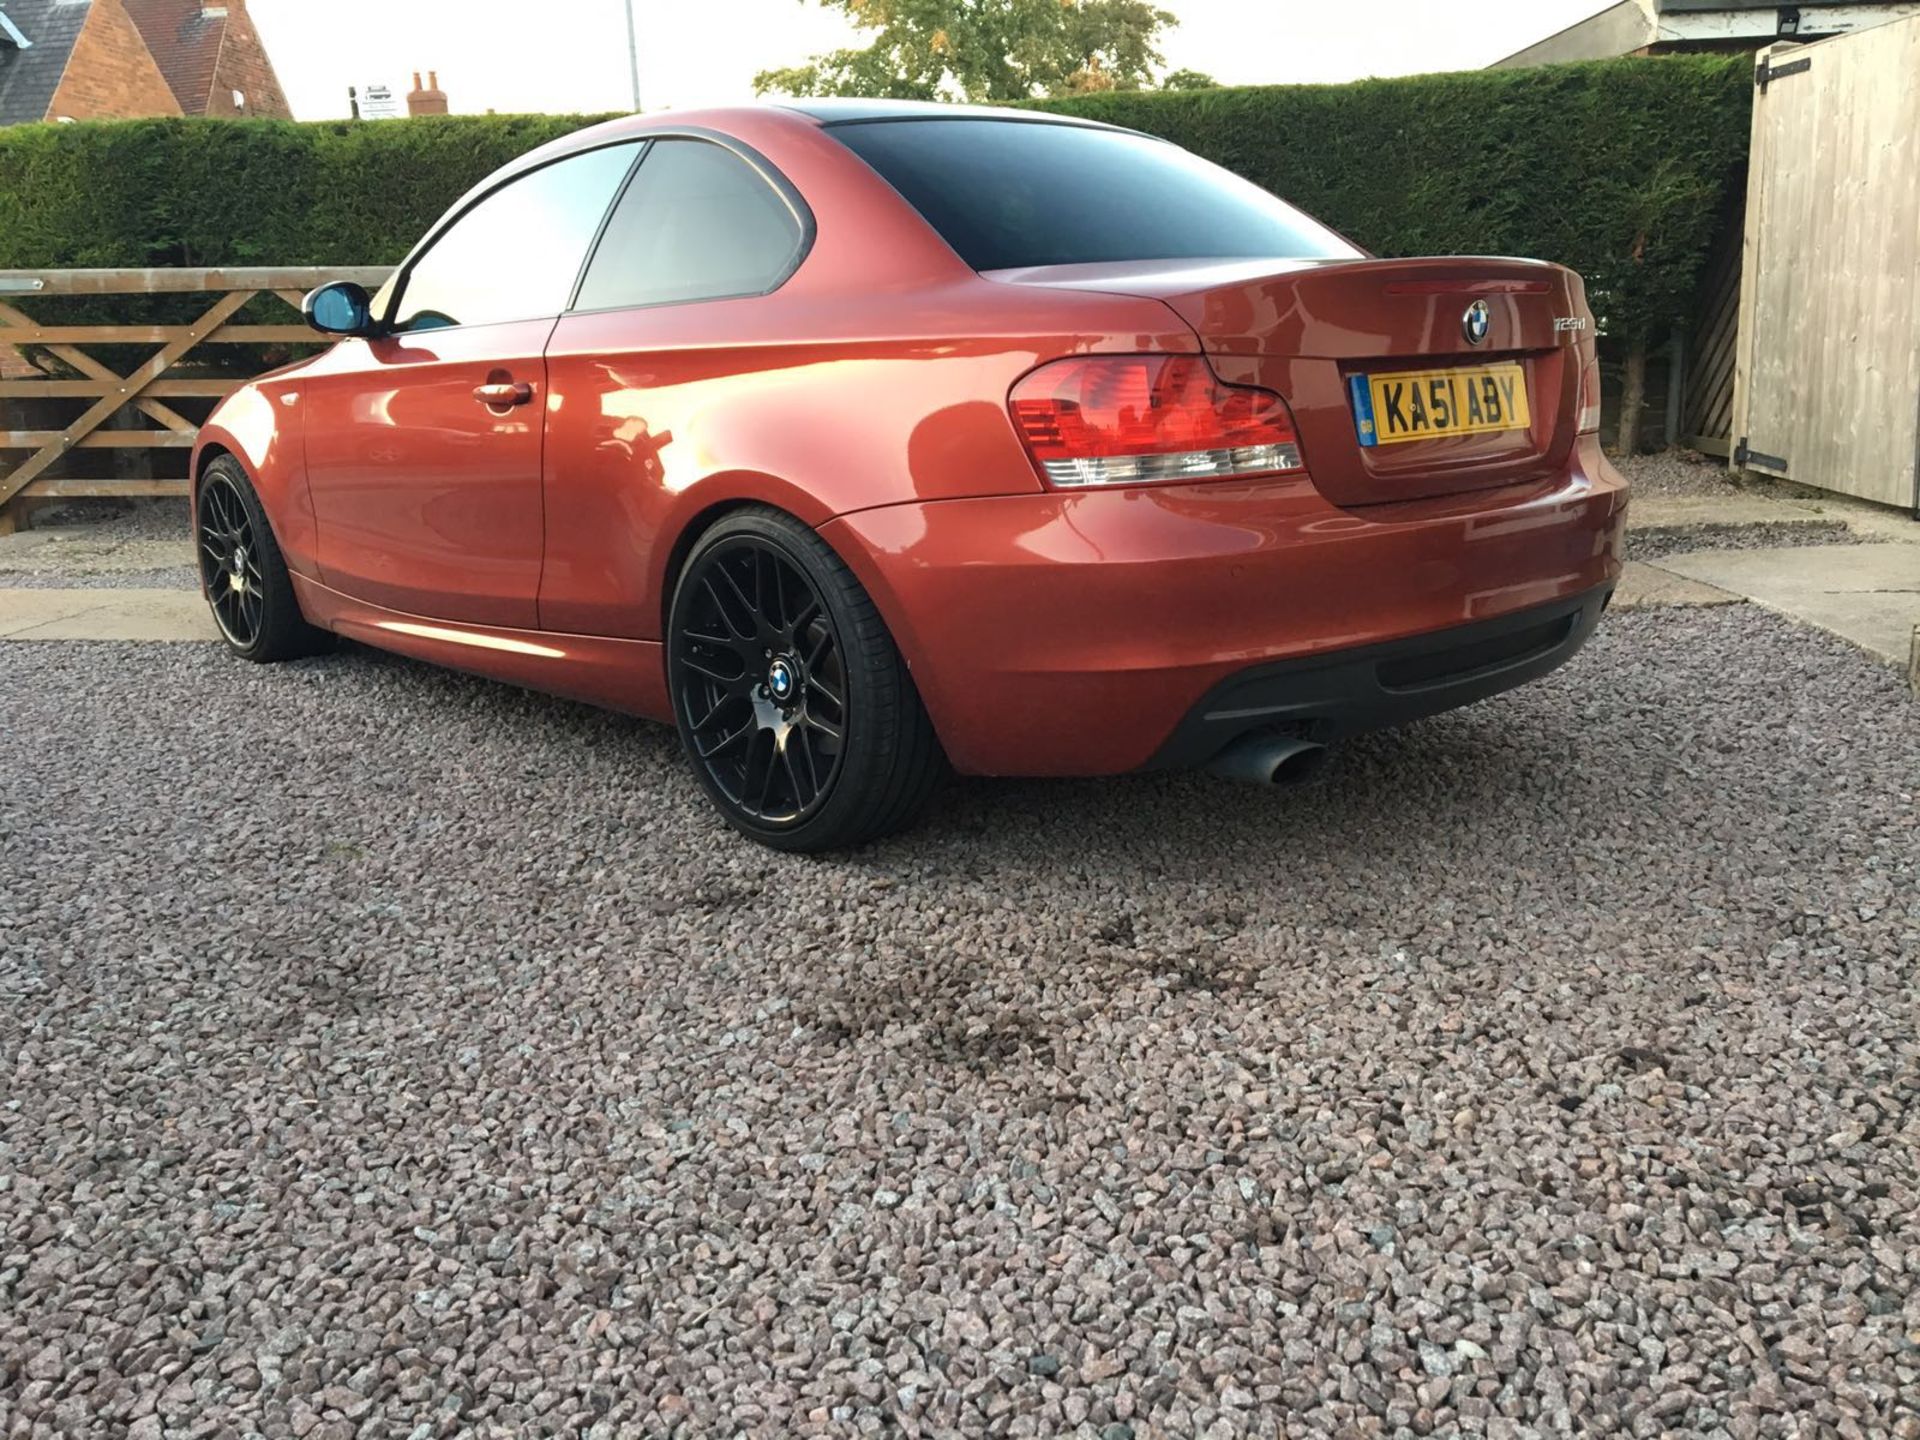 2008 BMW 123D M SPORT COUPE - 6 SPEED MANUAL GEARBOX *NO VAT* - Image 3 of 11